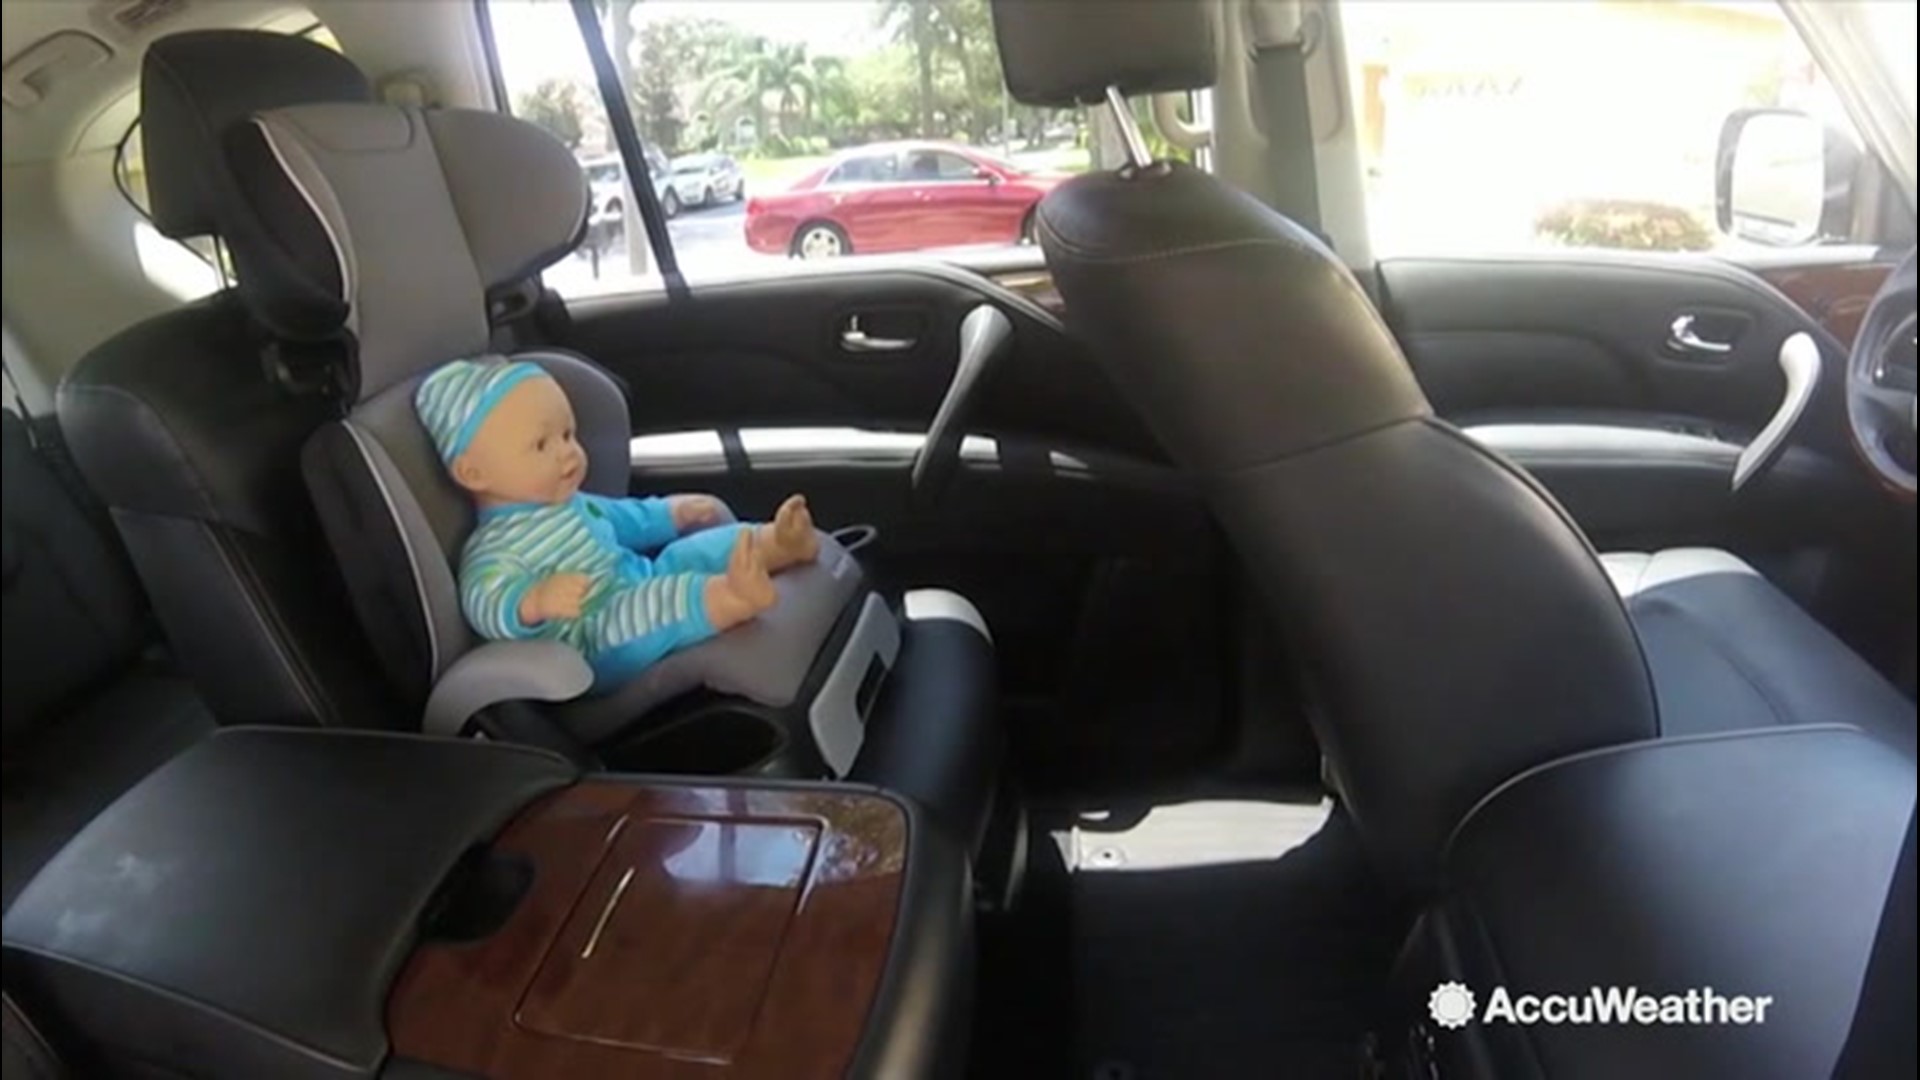 AccuWeather just recently spoke with the founder and president of kidsandcars.org where she shares tips on how to prevent child hot car deaths.